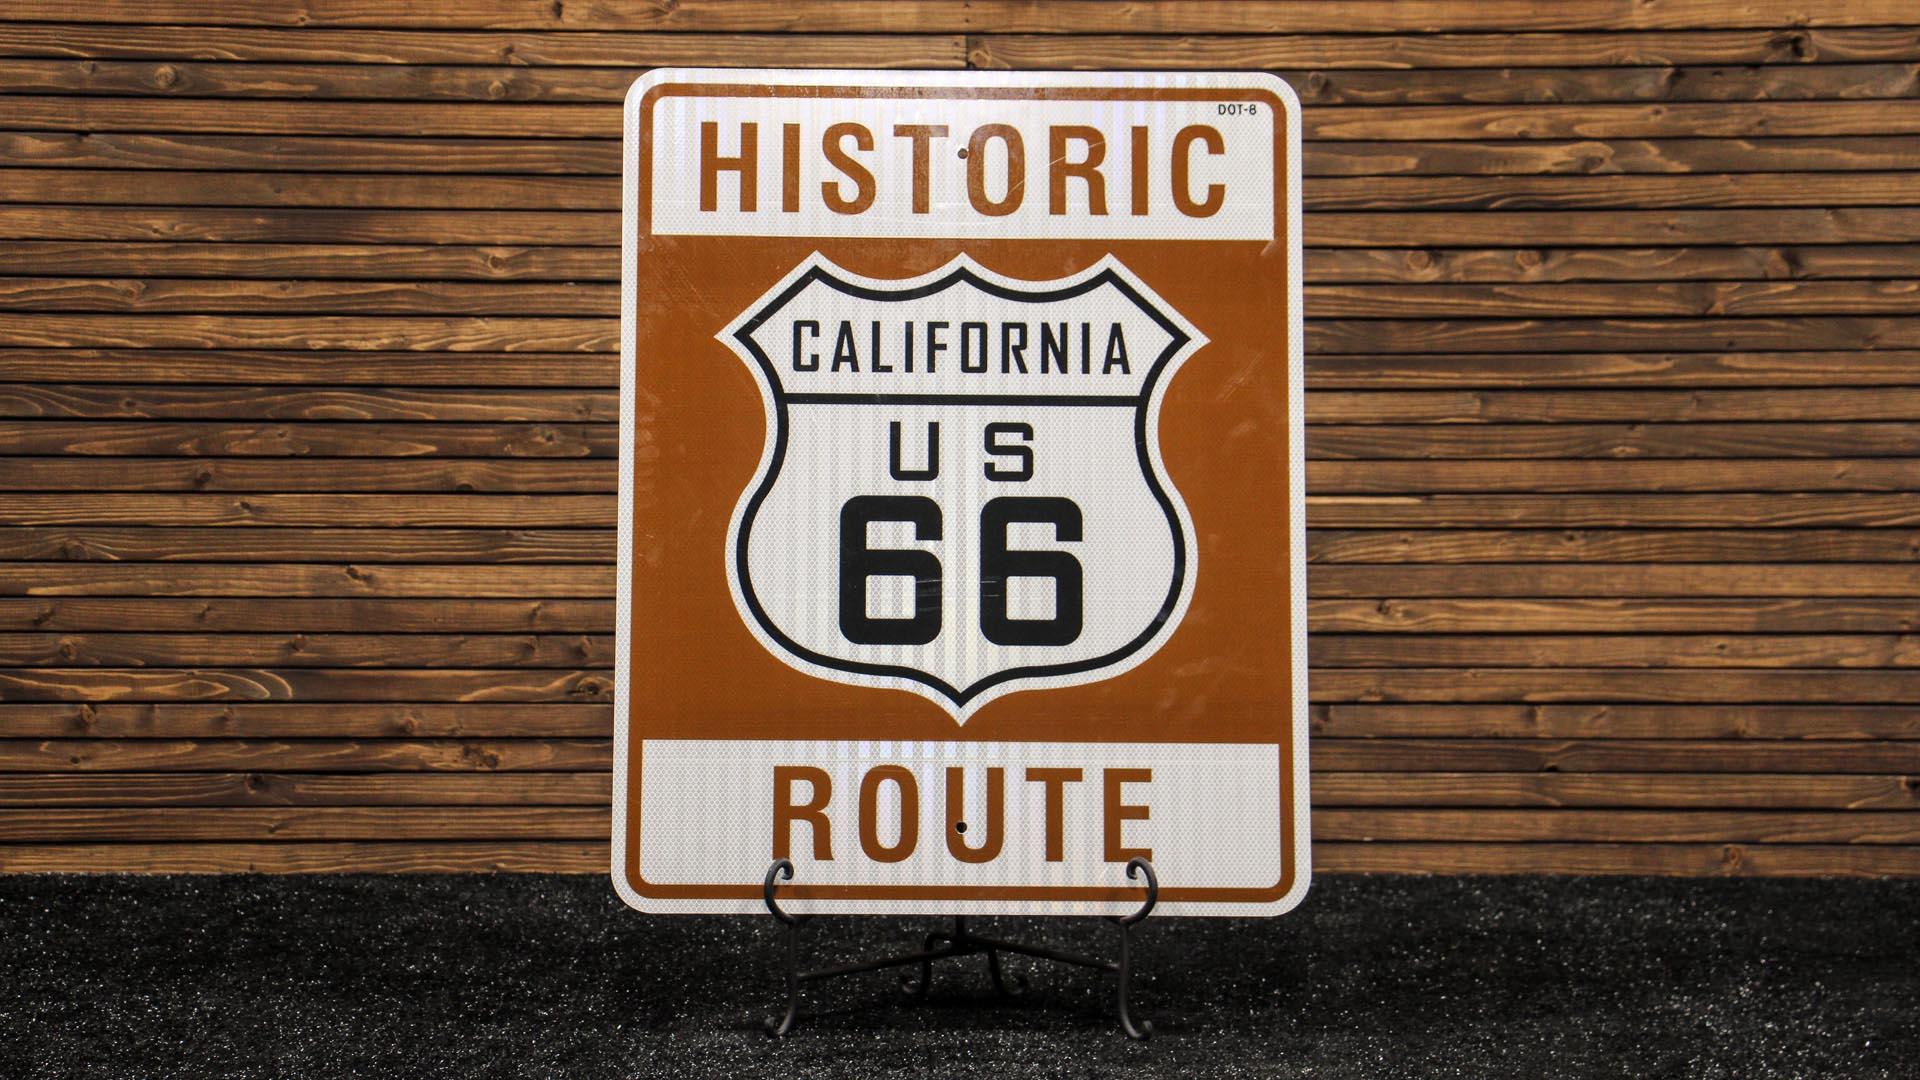 New Mexico Historic Route 66 Reflective Road Sign - New